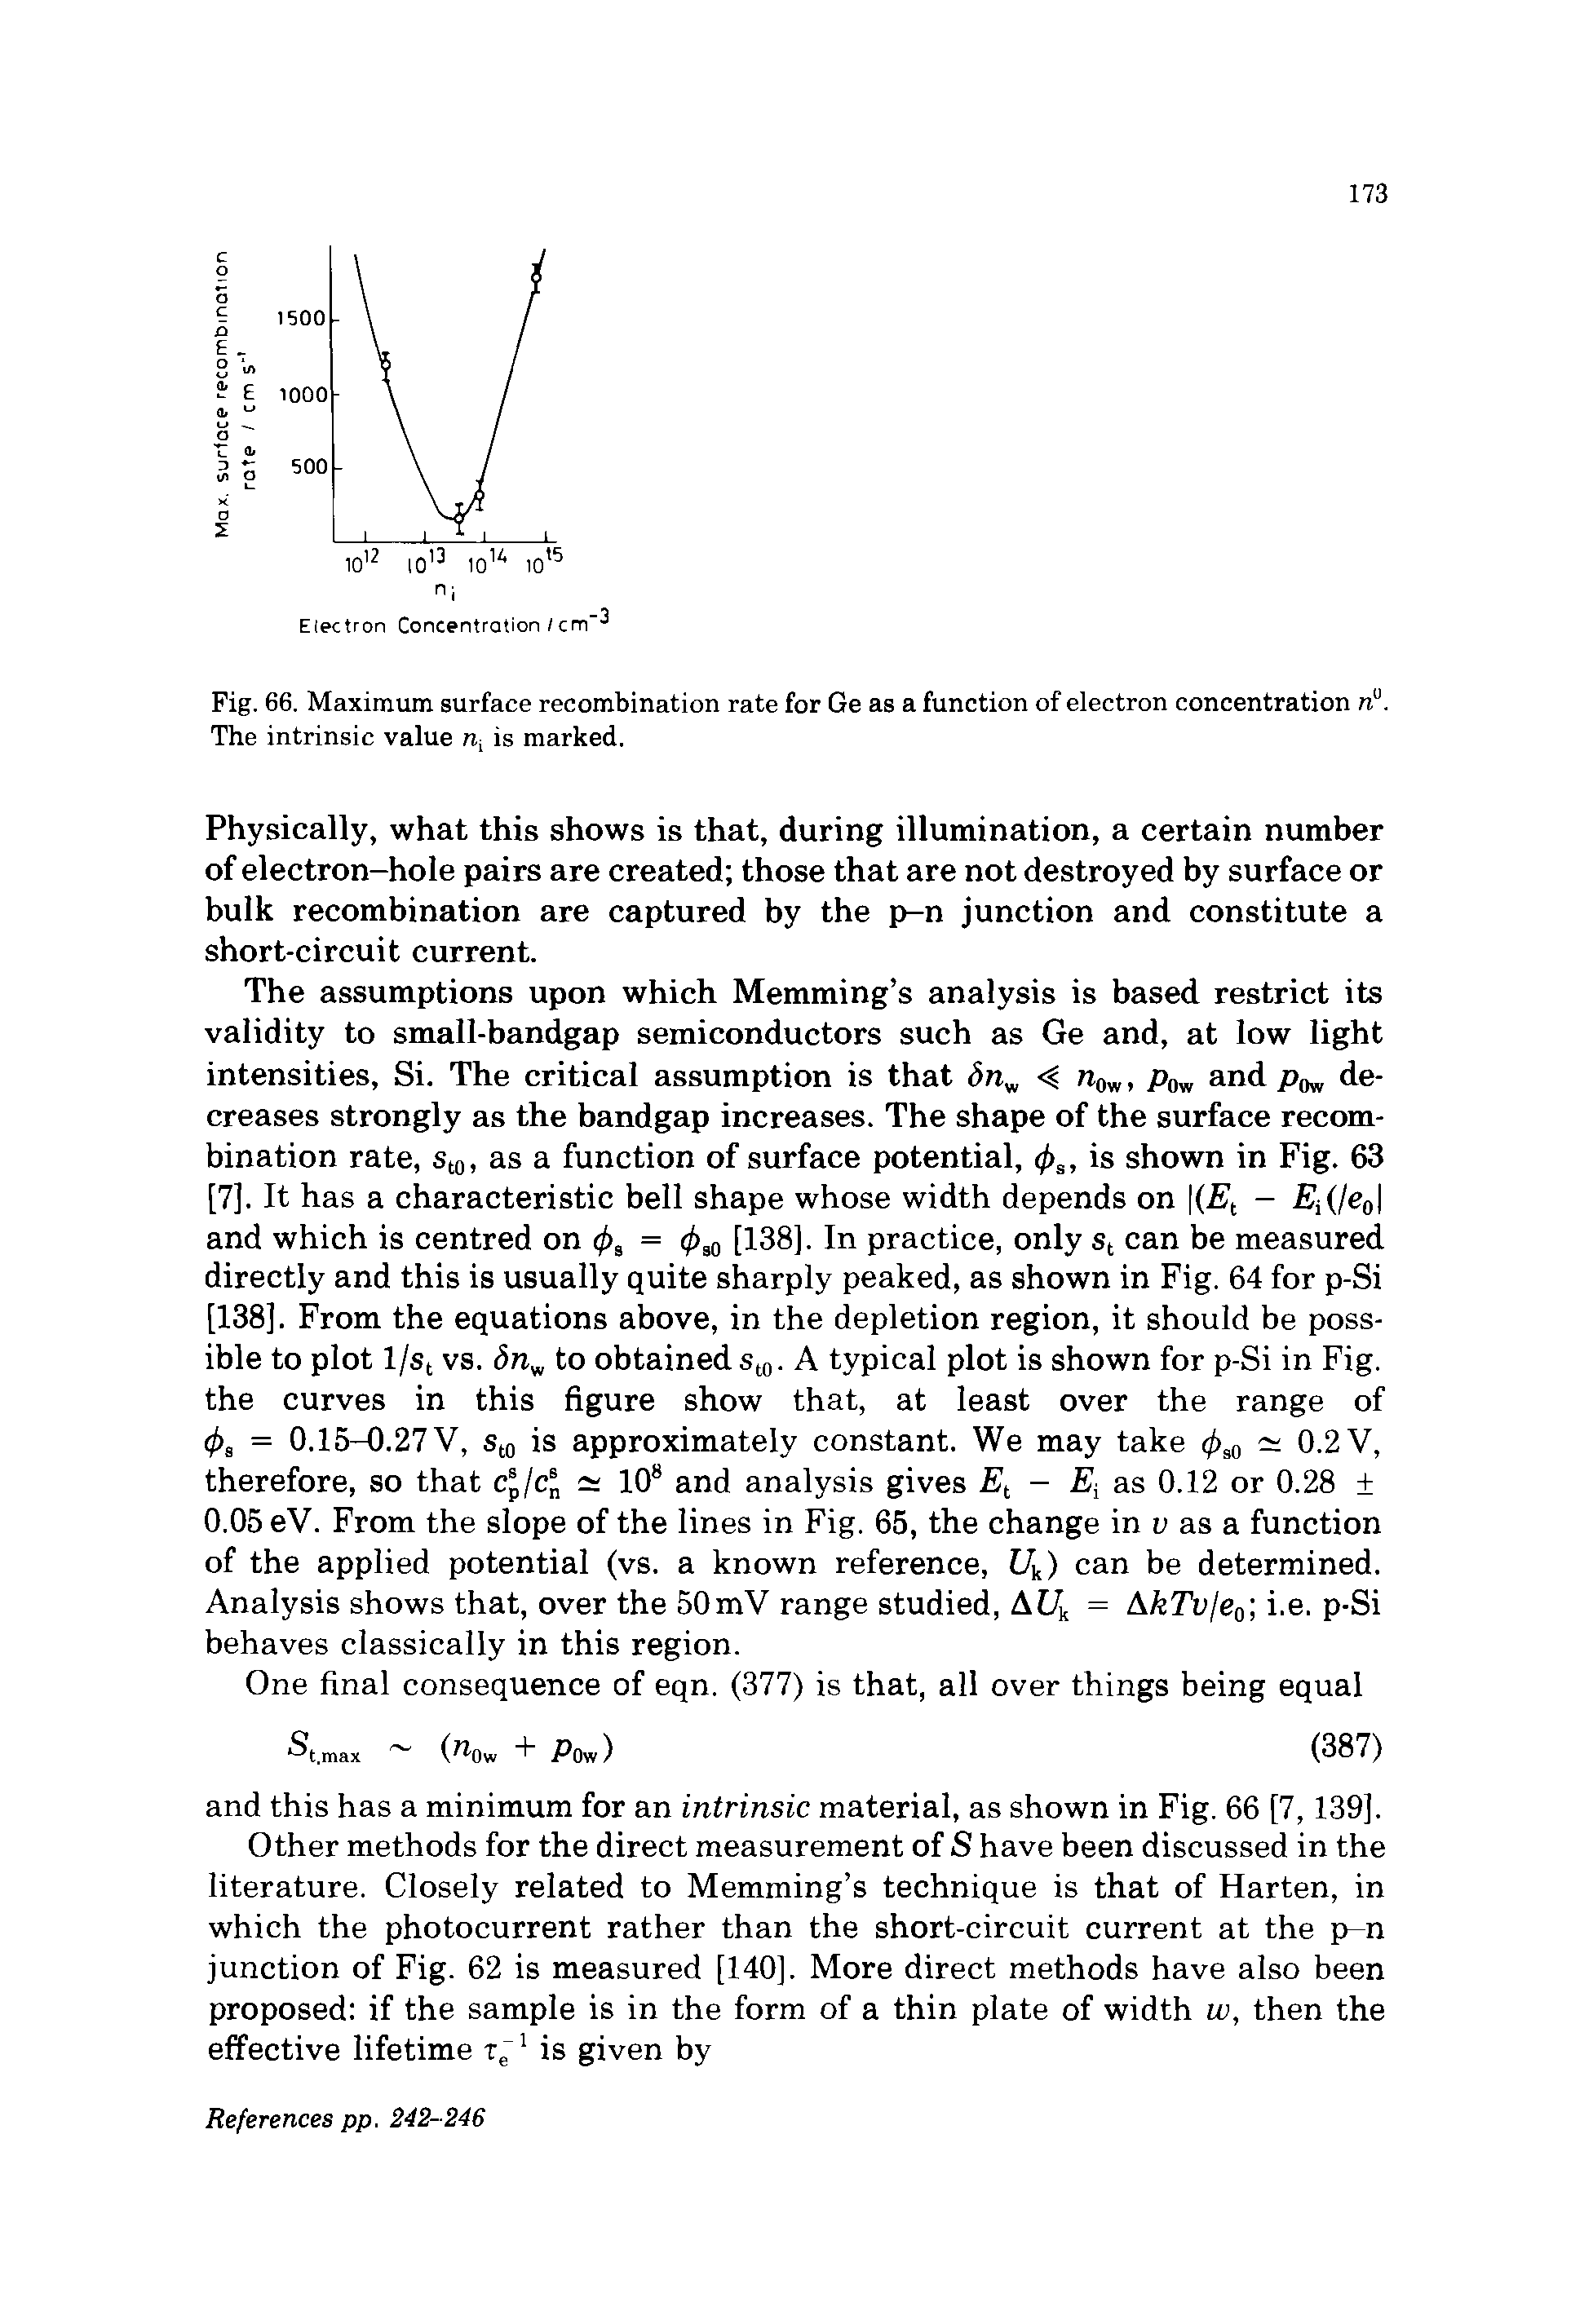 Fig. 66. Maximum surface recombination rate for Ge as a function of electron concentration n". The intrinsic value nt is marked.